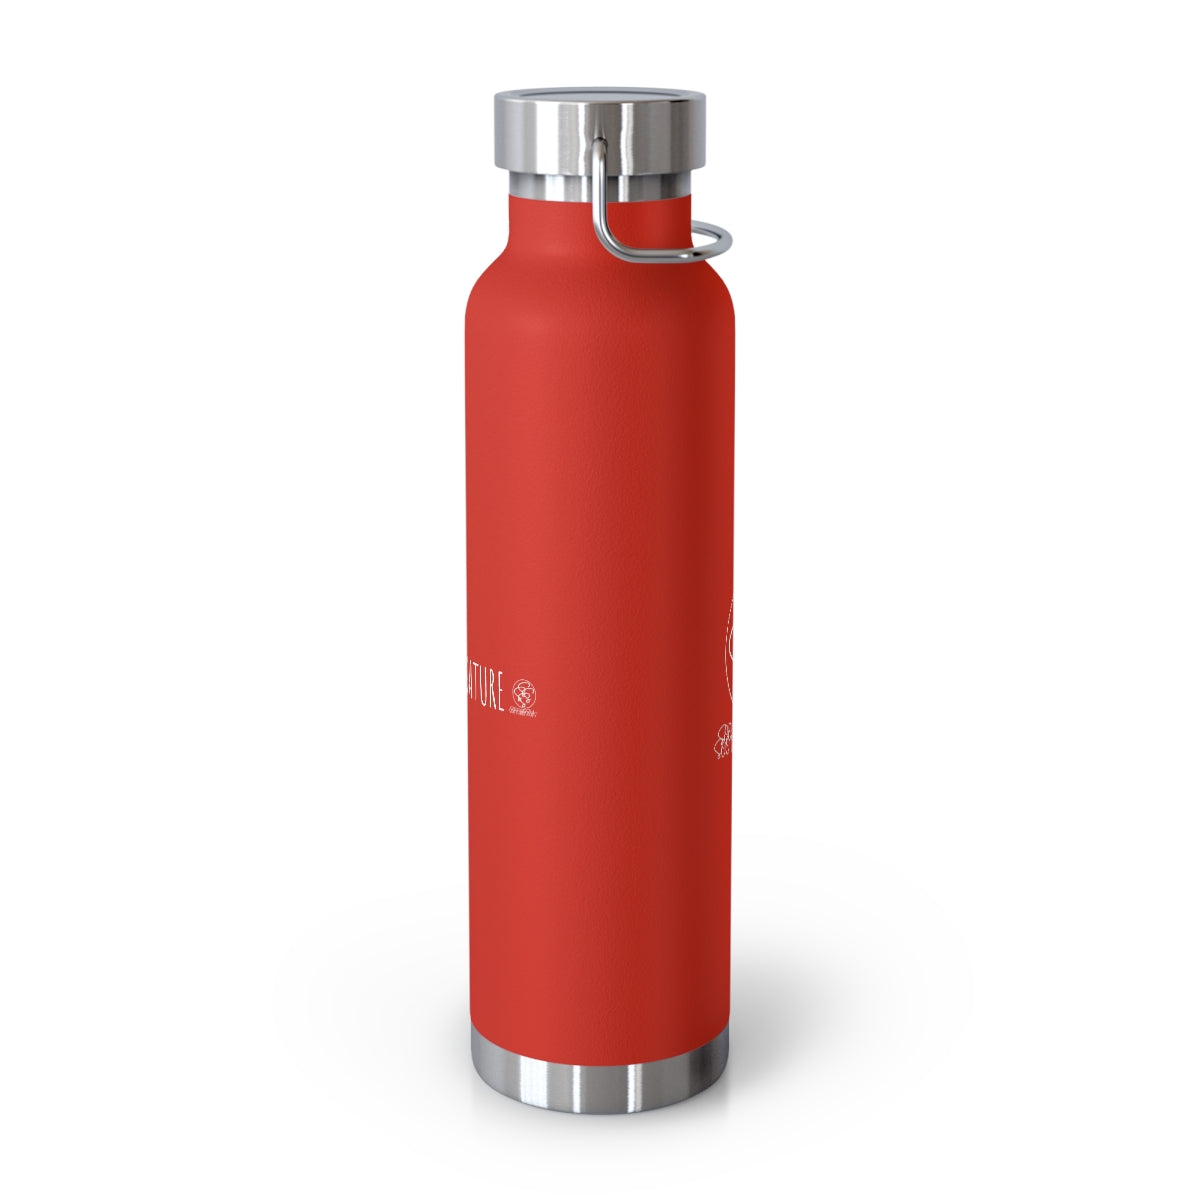 SSSS Soothing Copper Vacuum Insulated Bottle, 22oz